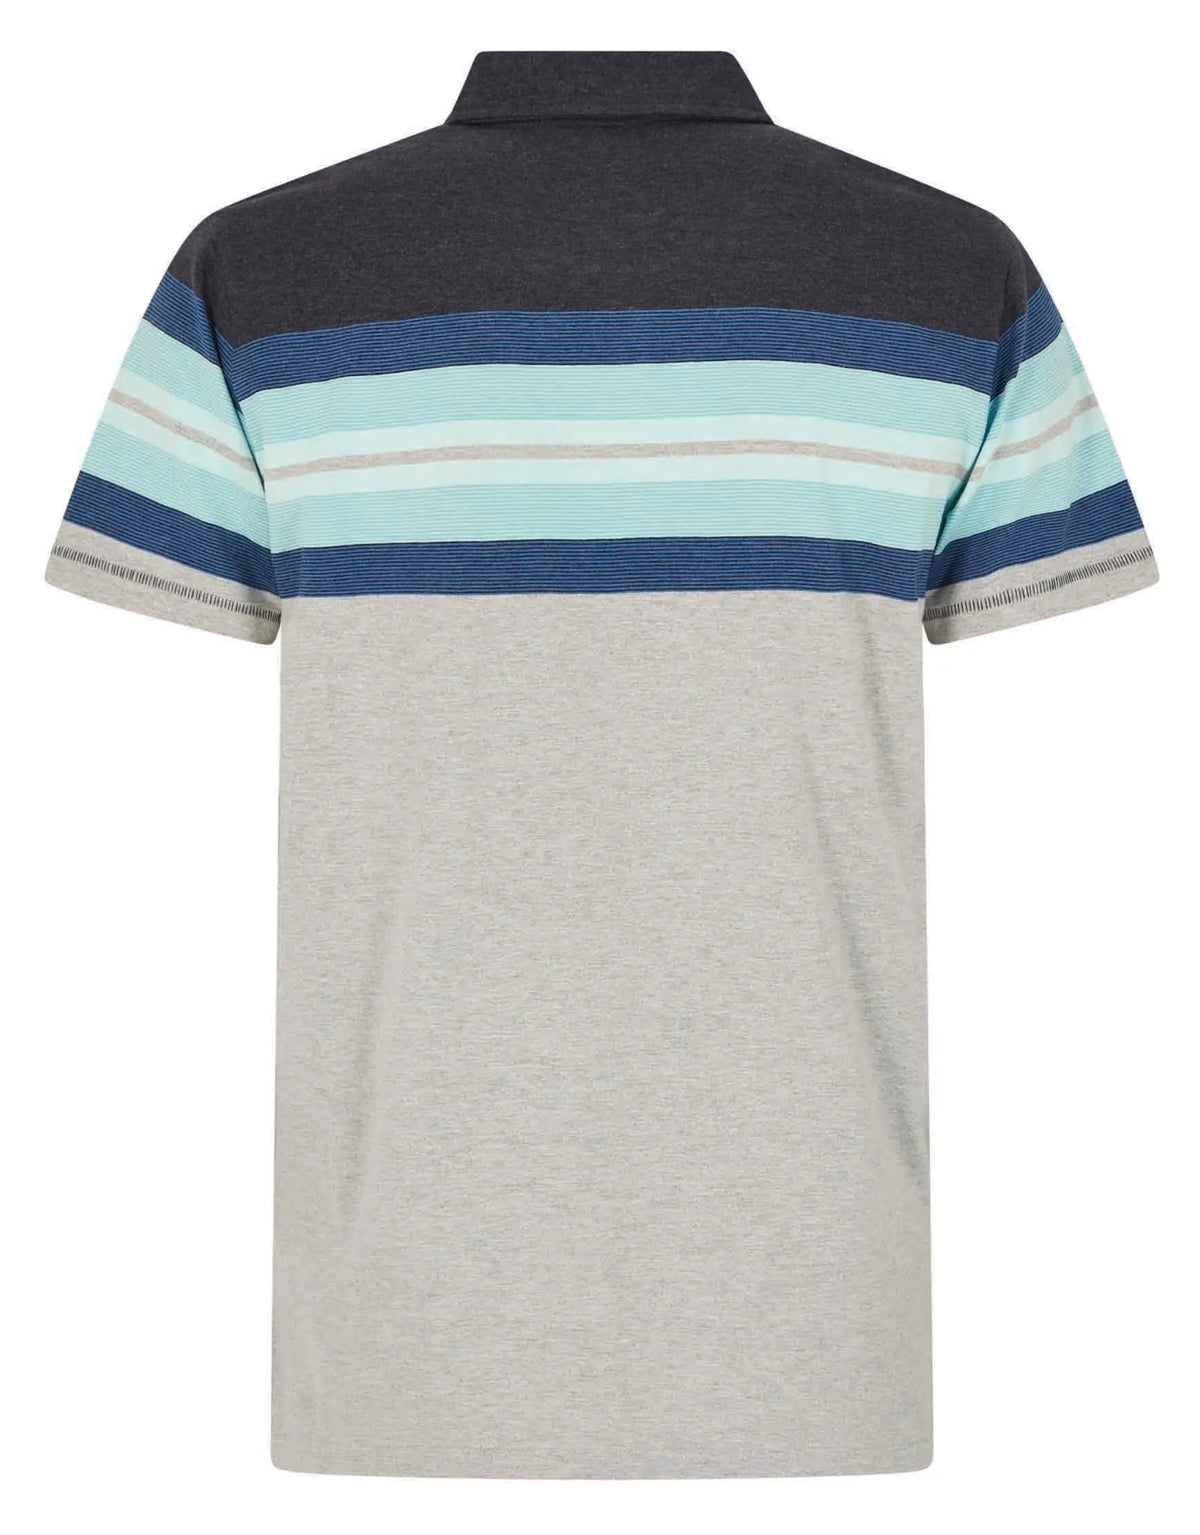 Men's chest stripe polo shirt from Weird Fish in Sky Blue.